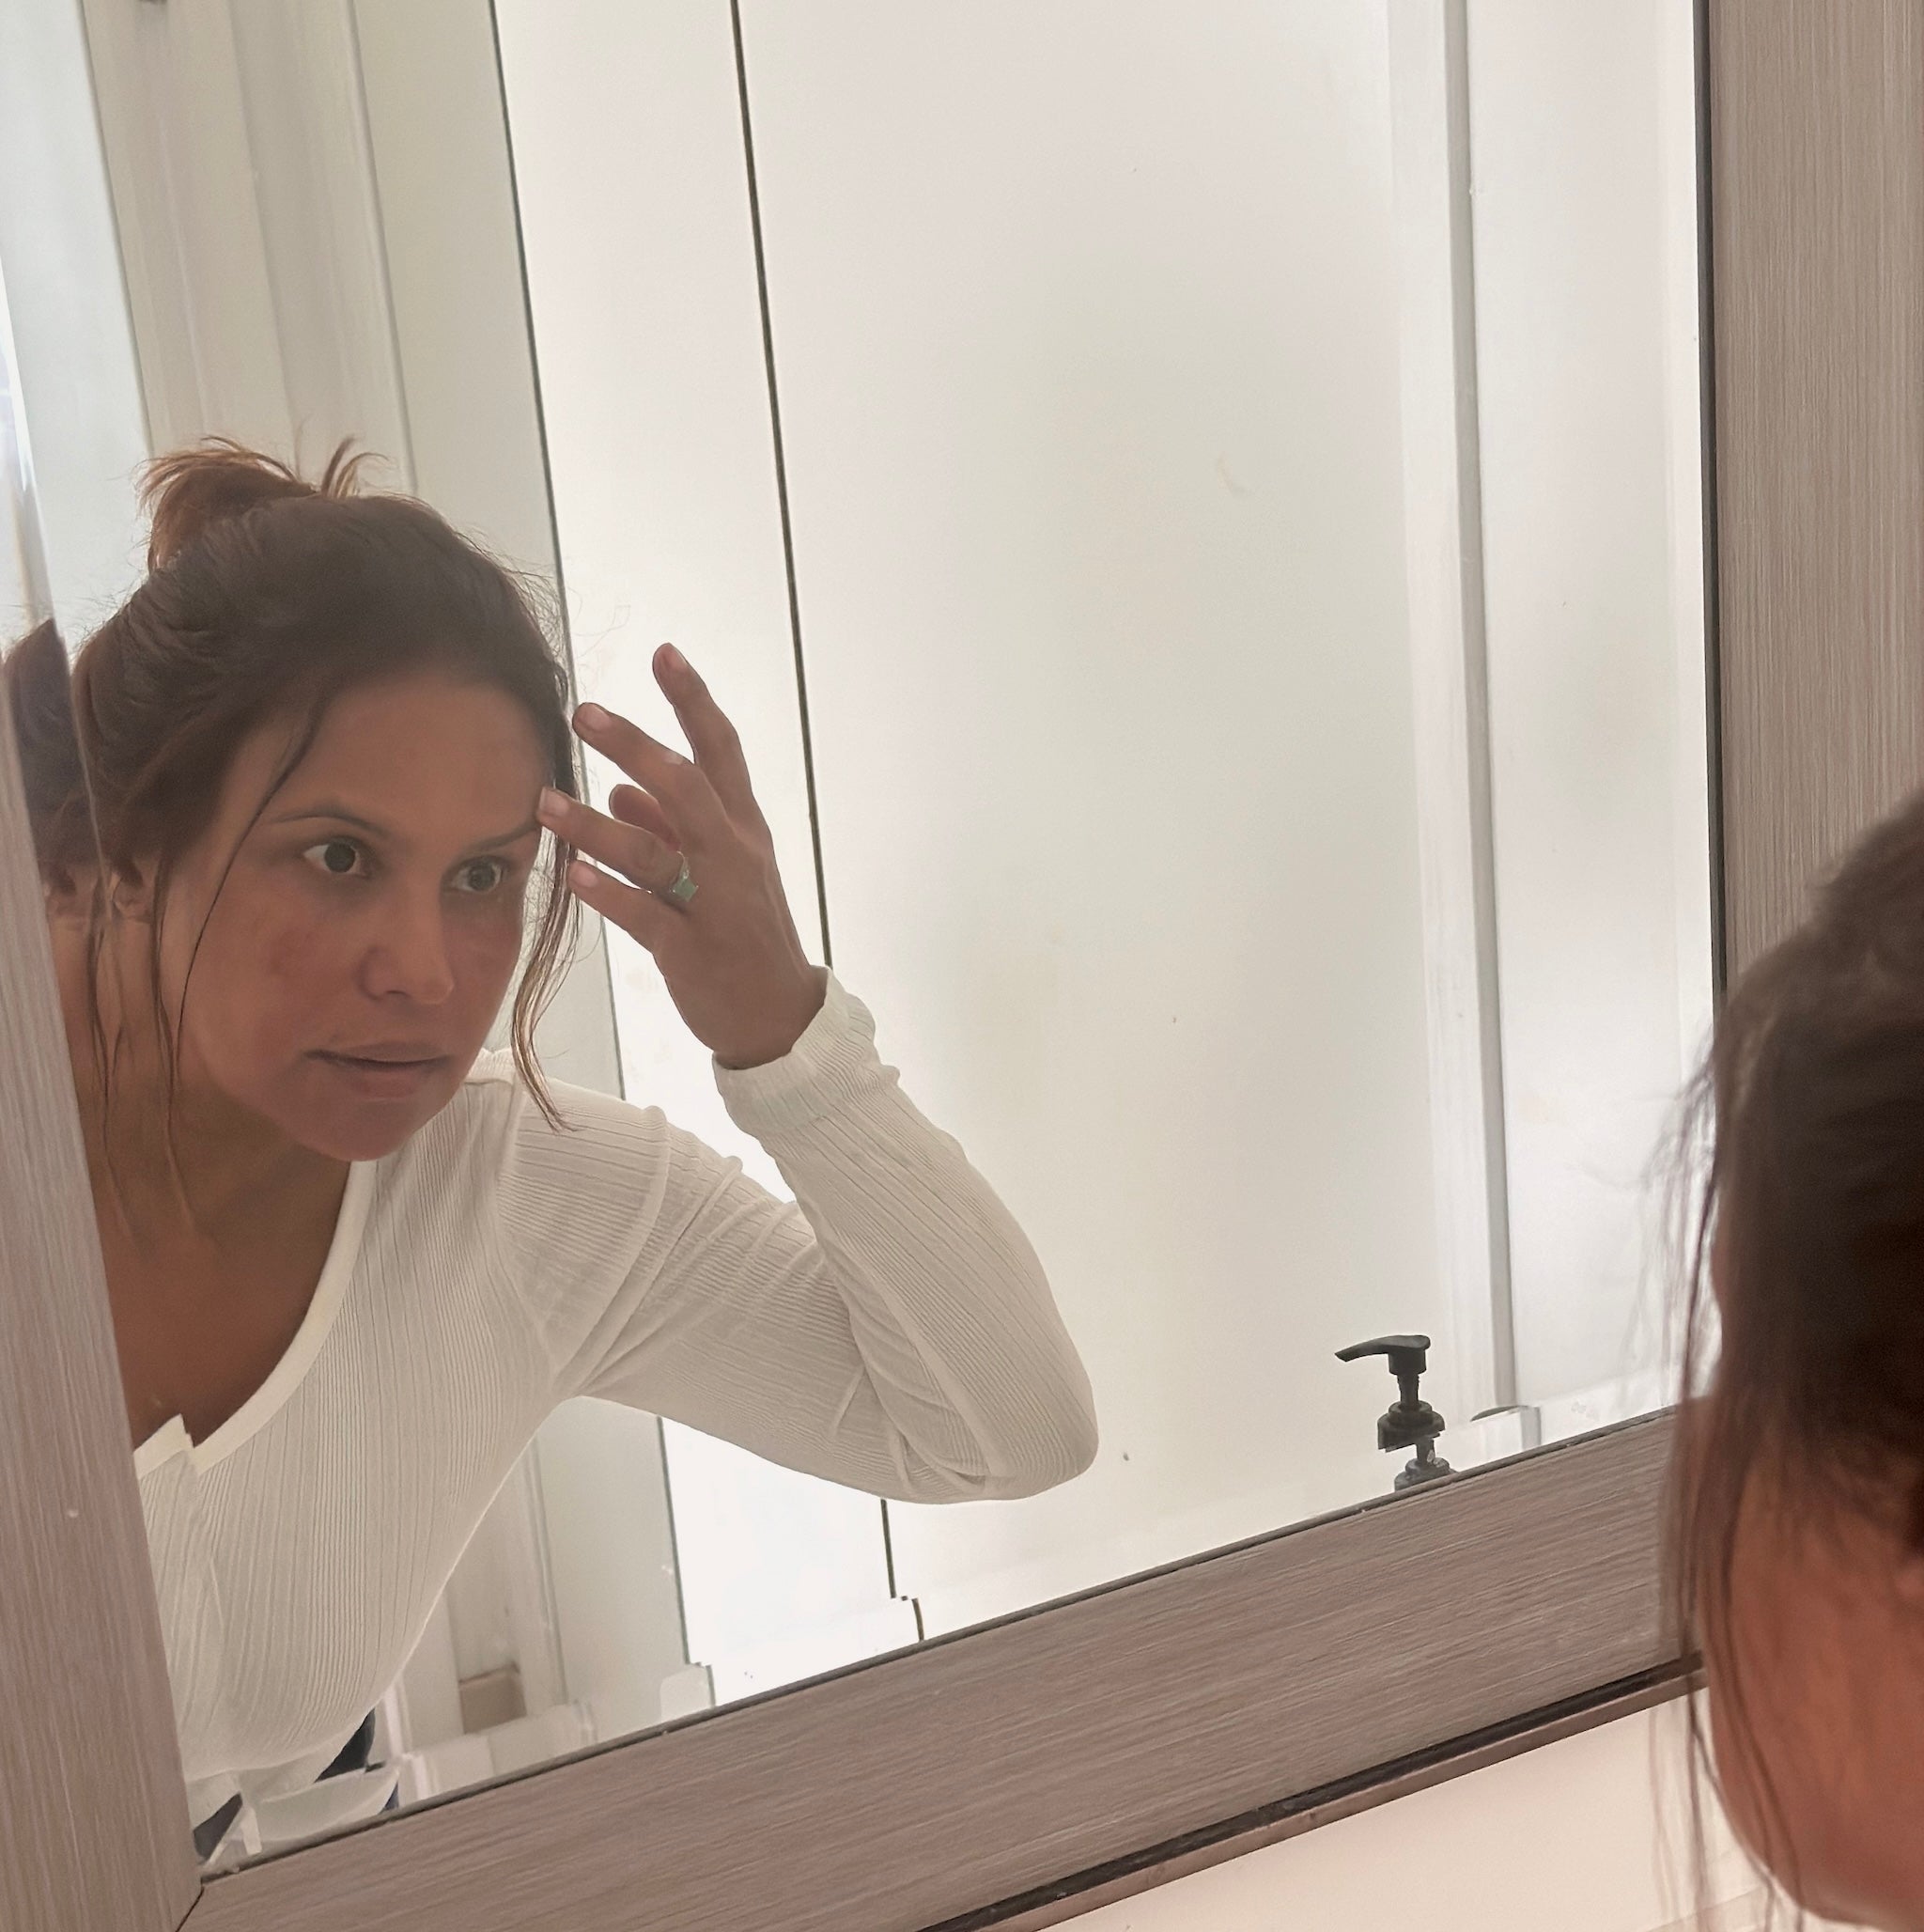 35+ year woman looking at skin in mirror feeling discouraged about her skin. Ready to take Gunilla Eisenberg's Better than Botox Pro-aging skincare course for lasting skin confidence.